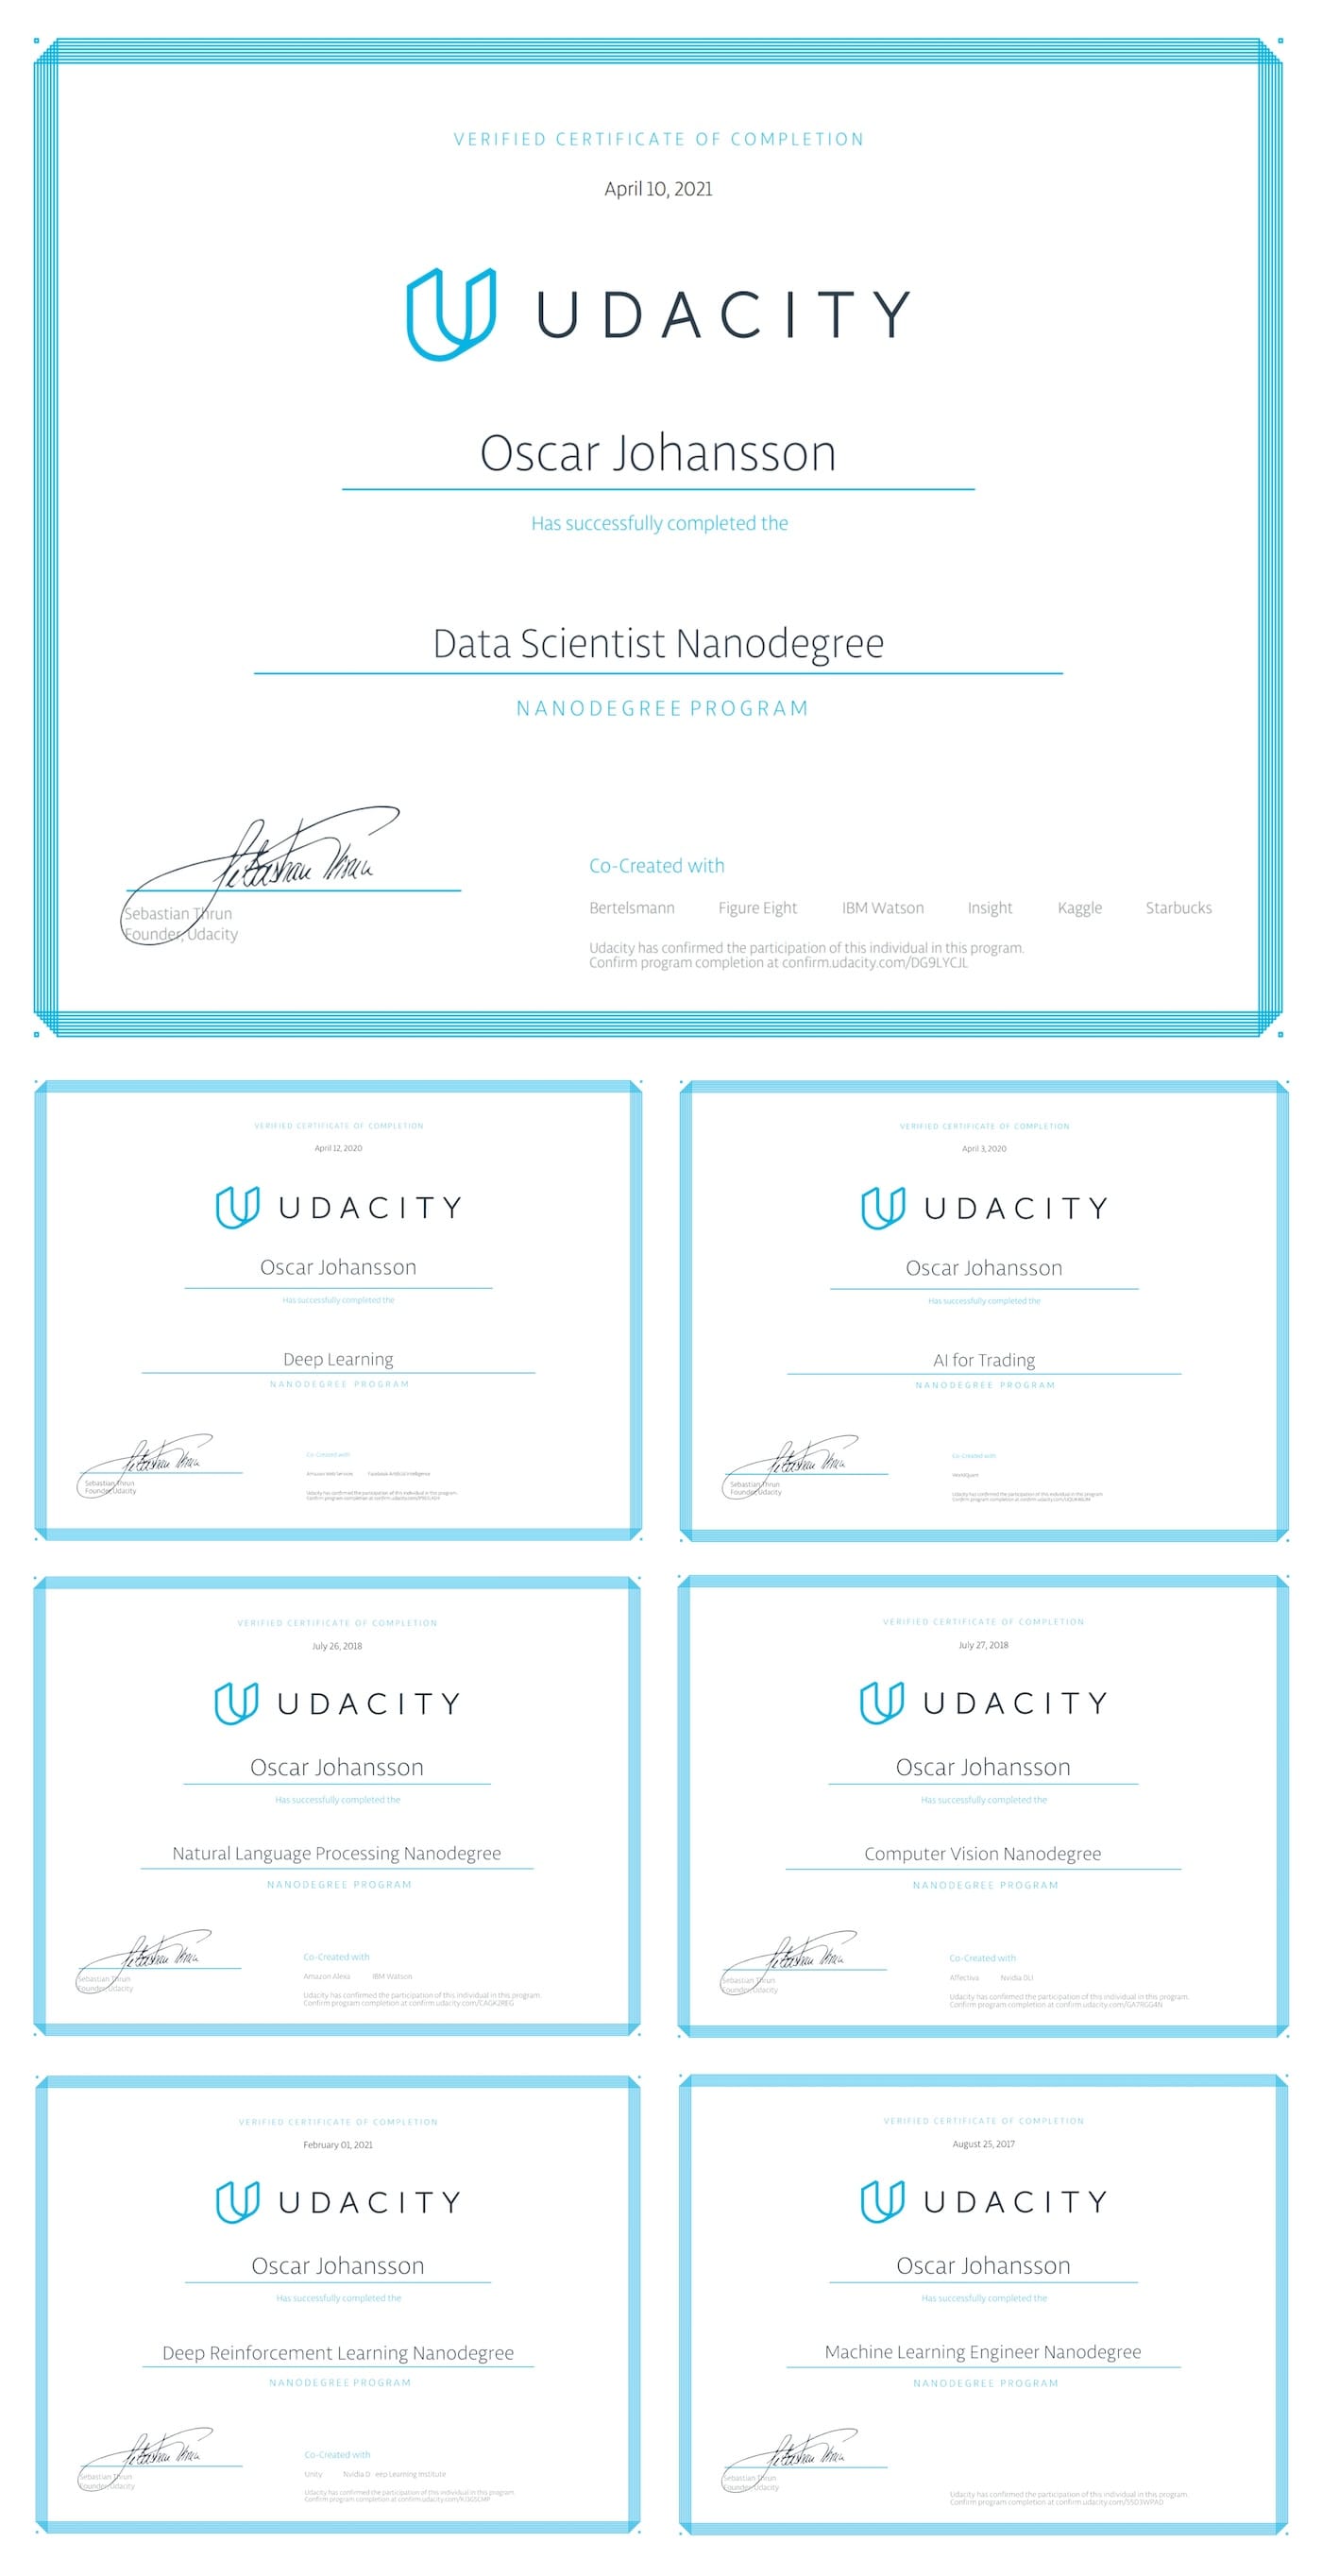 My Review of Udacity After Completing 7 Nanodegrees